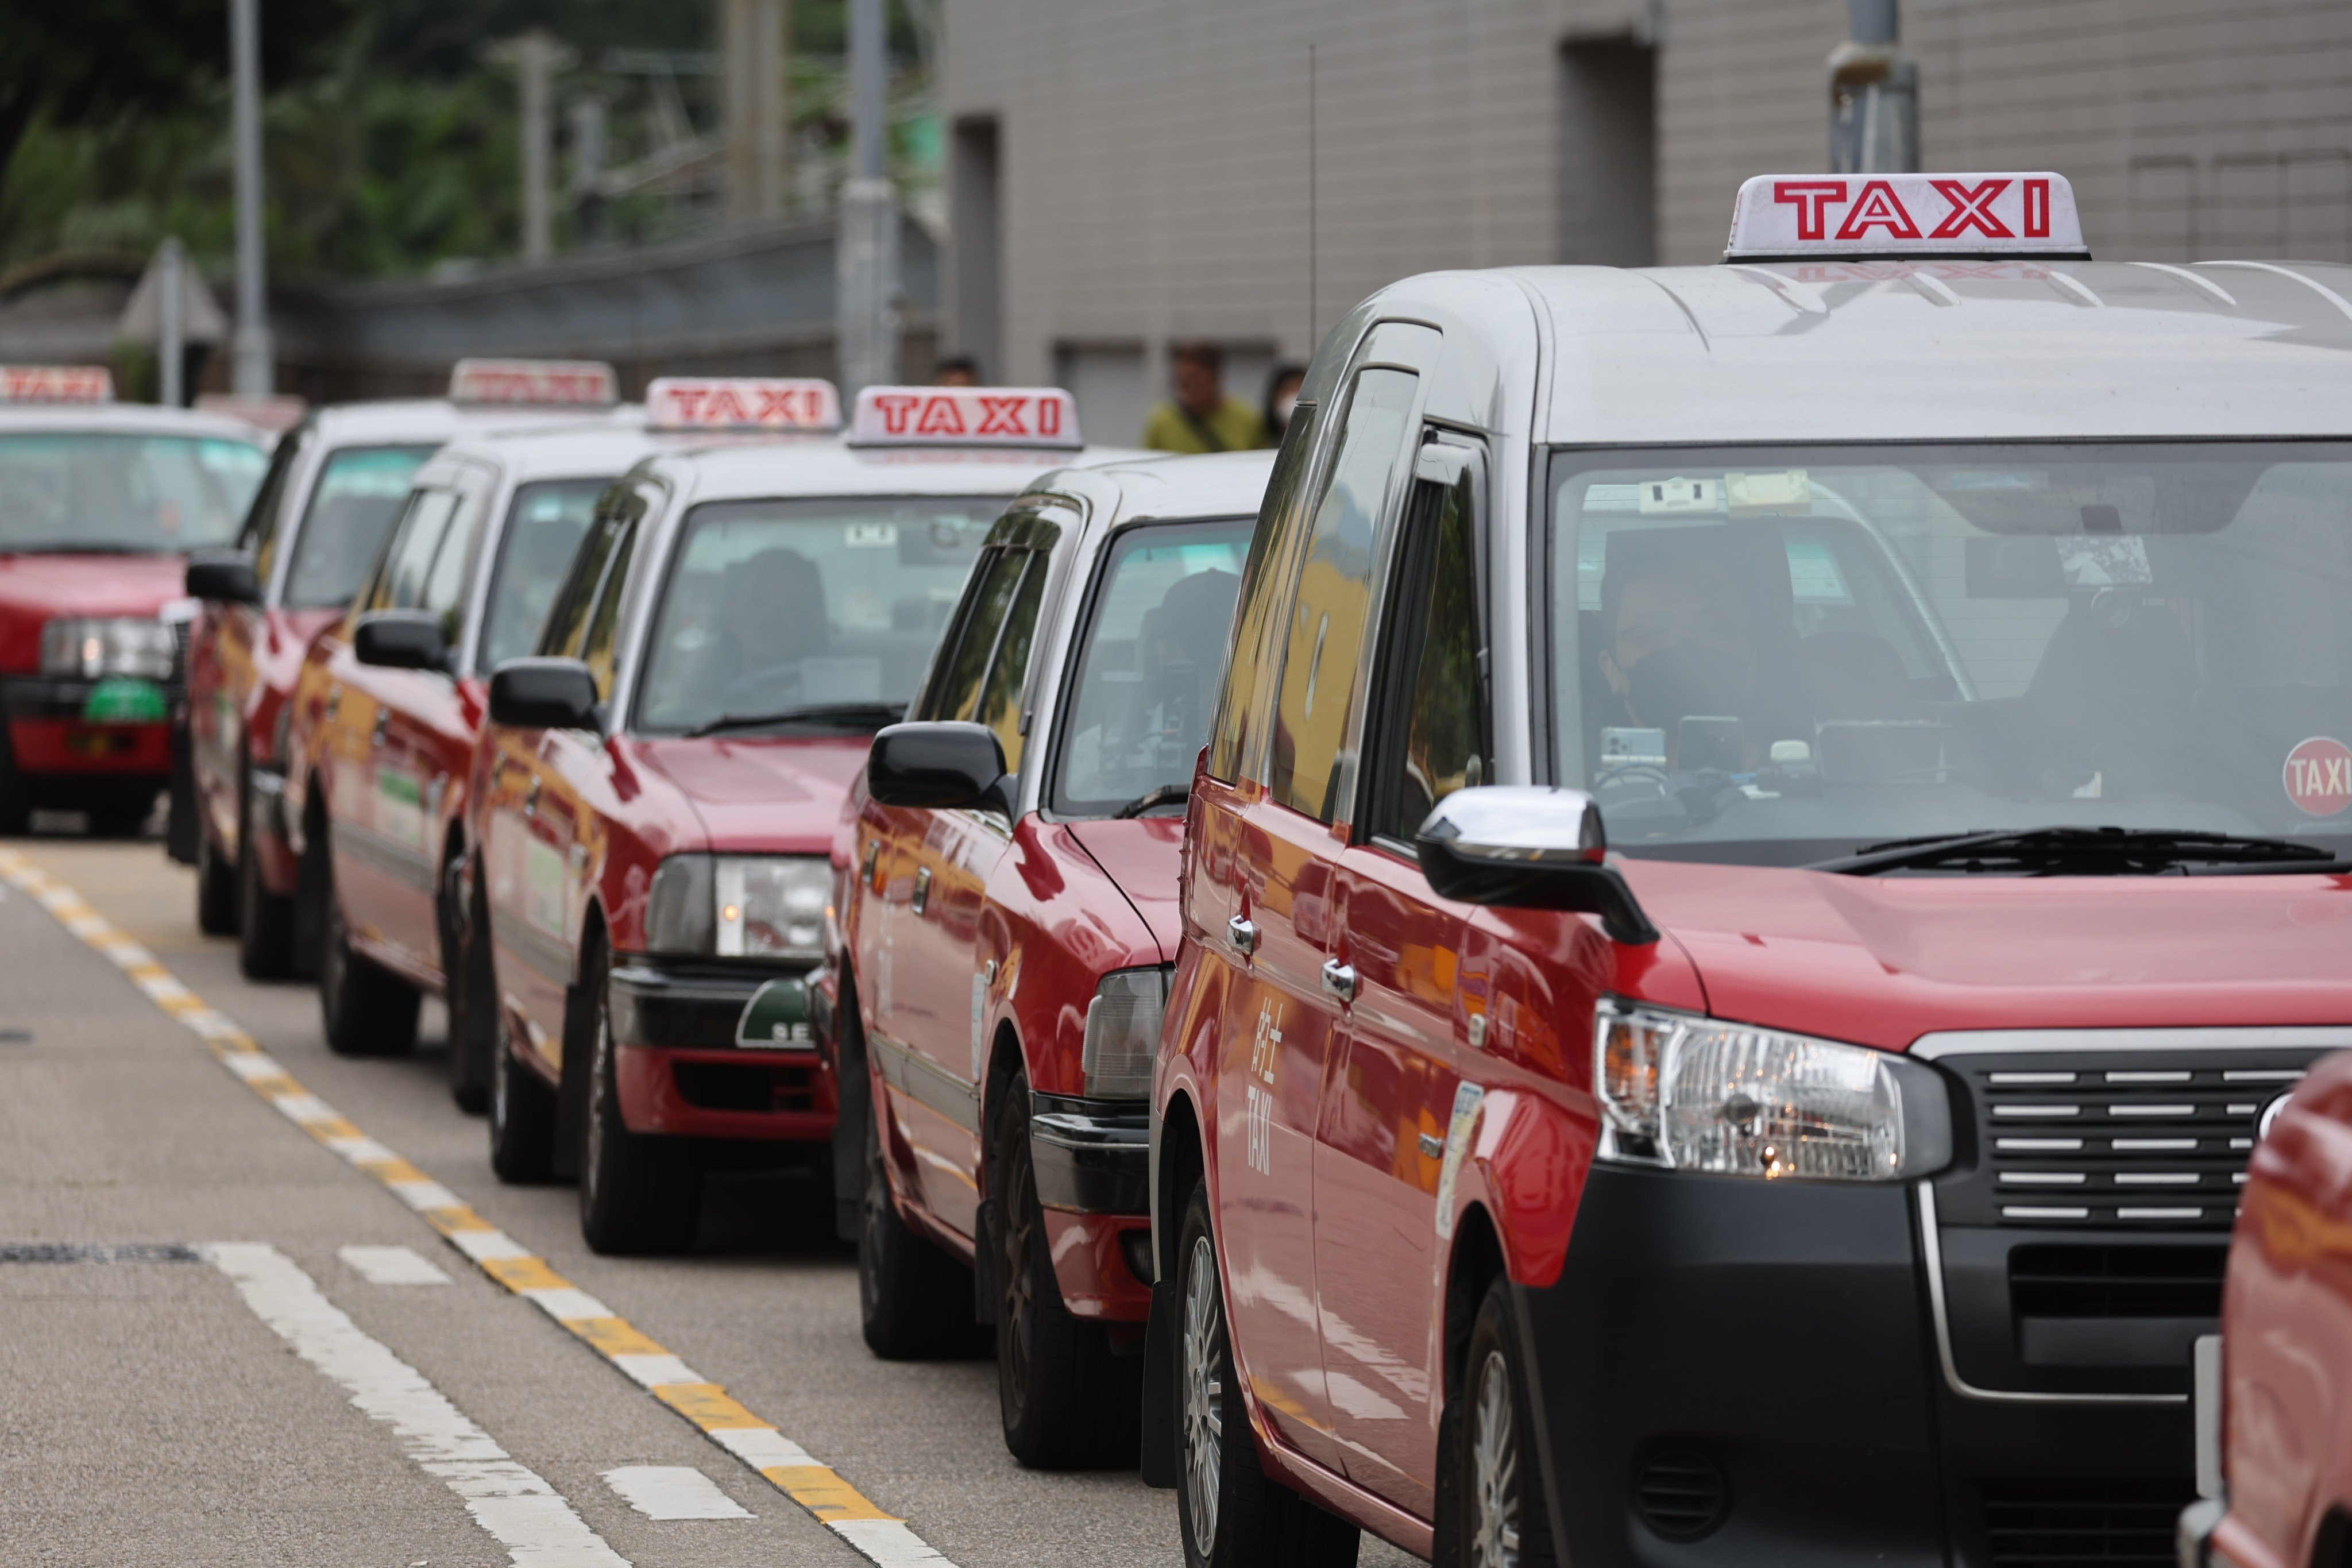 The taxi industry’s reputation has suffered amid a feud with Uber. Photo: Edmond So